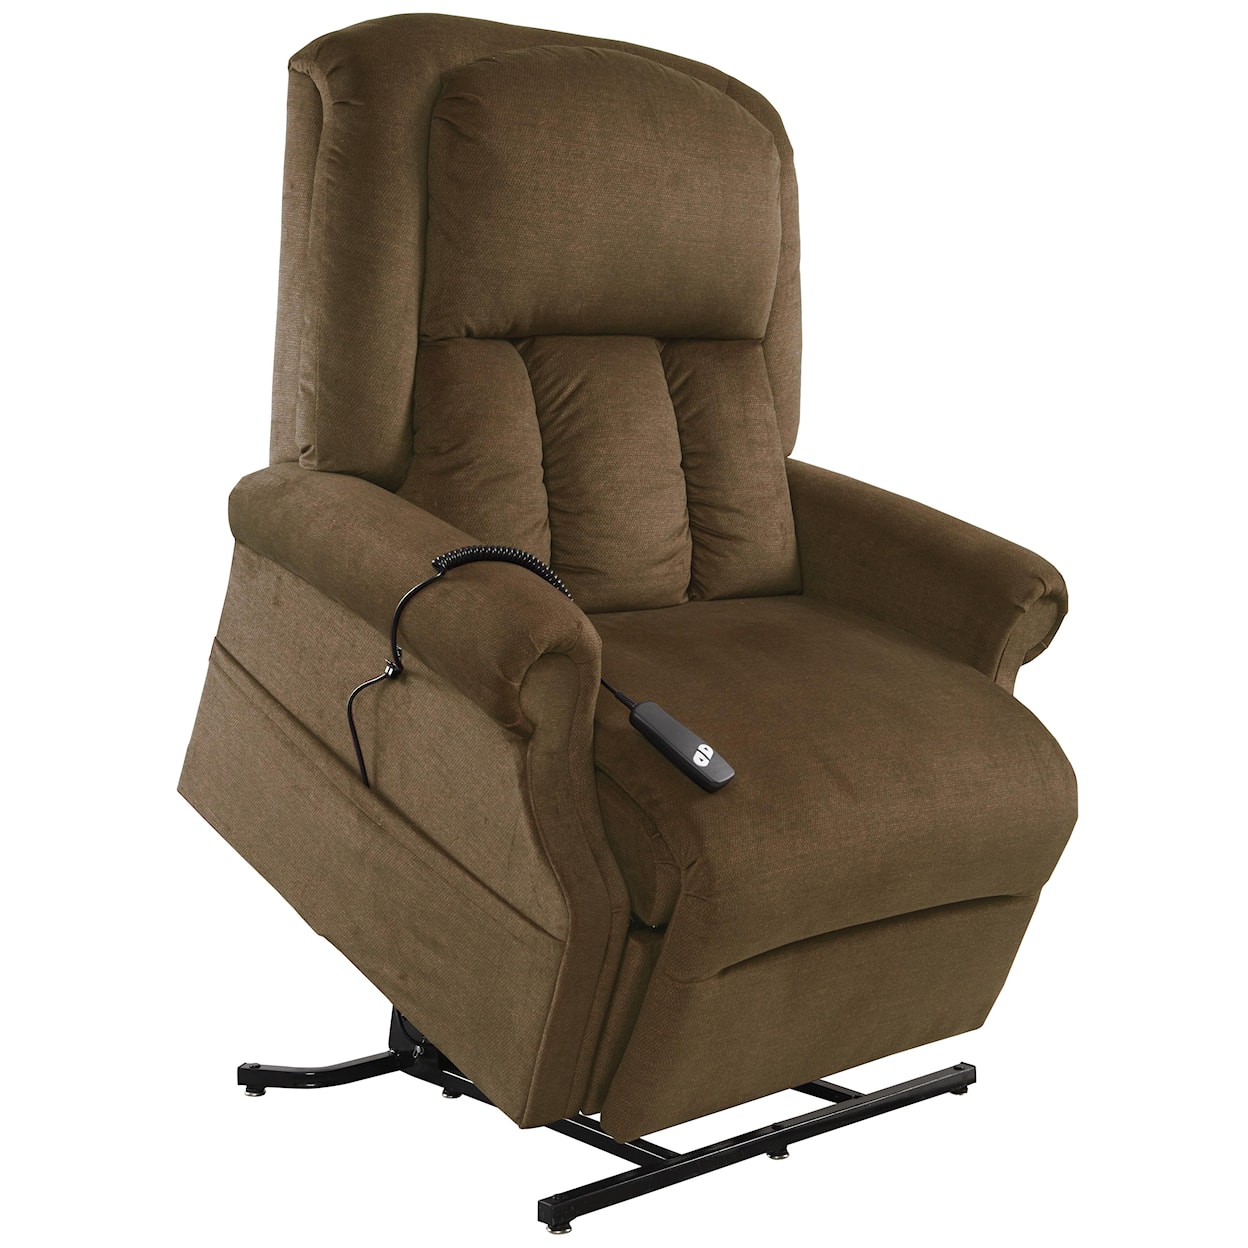 Windermere Motion Lift Chairs 3-Position Reclining Lift Chair with Power